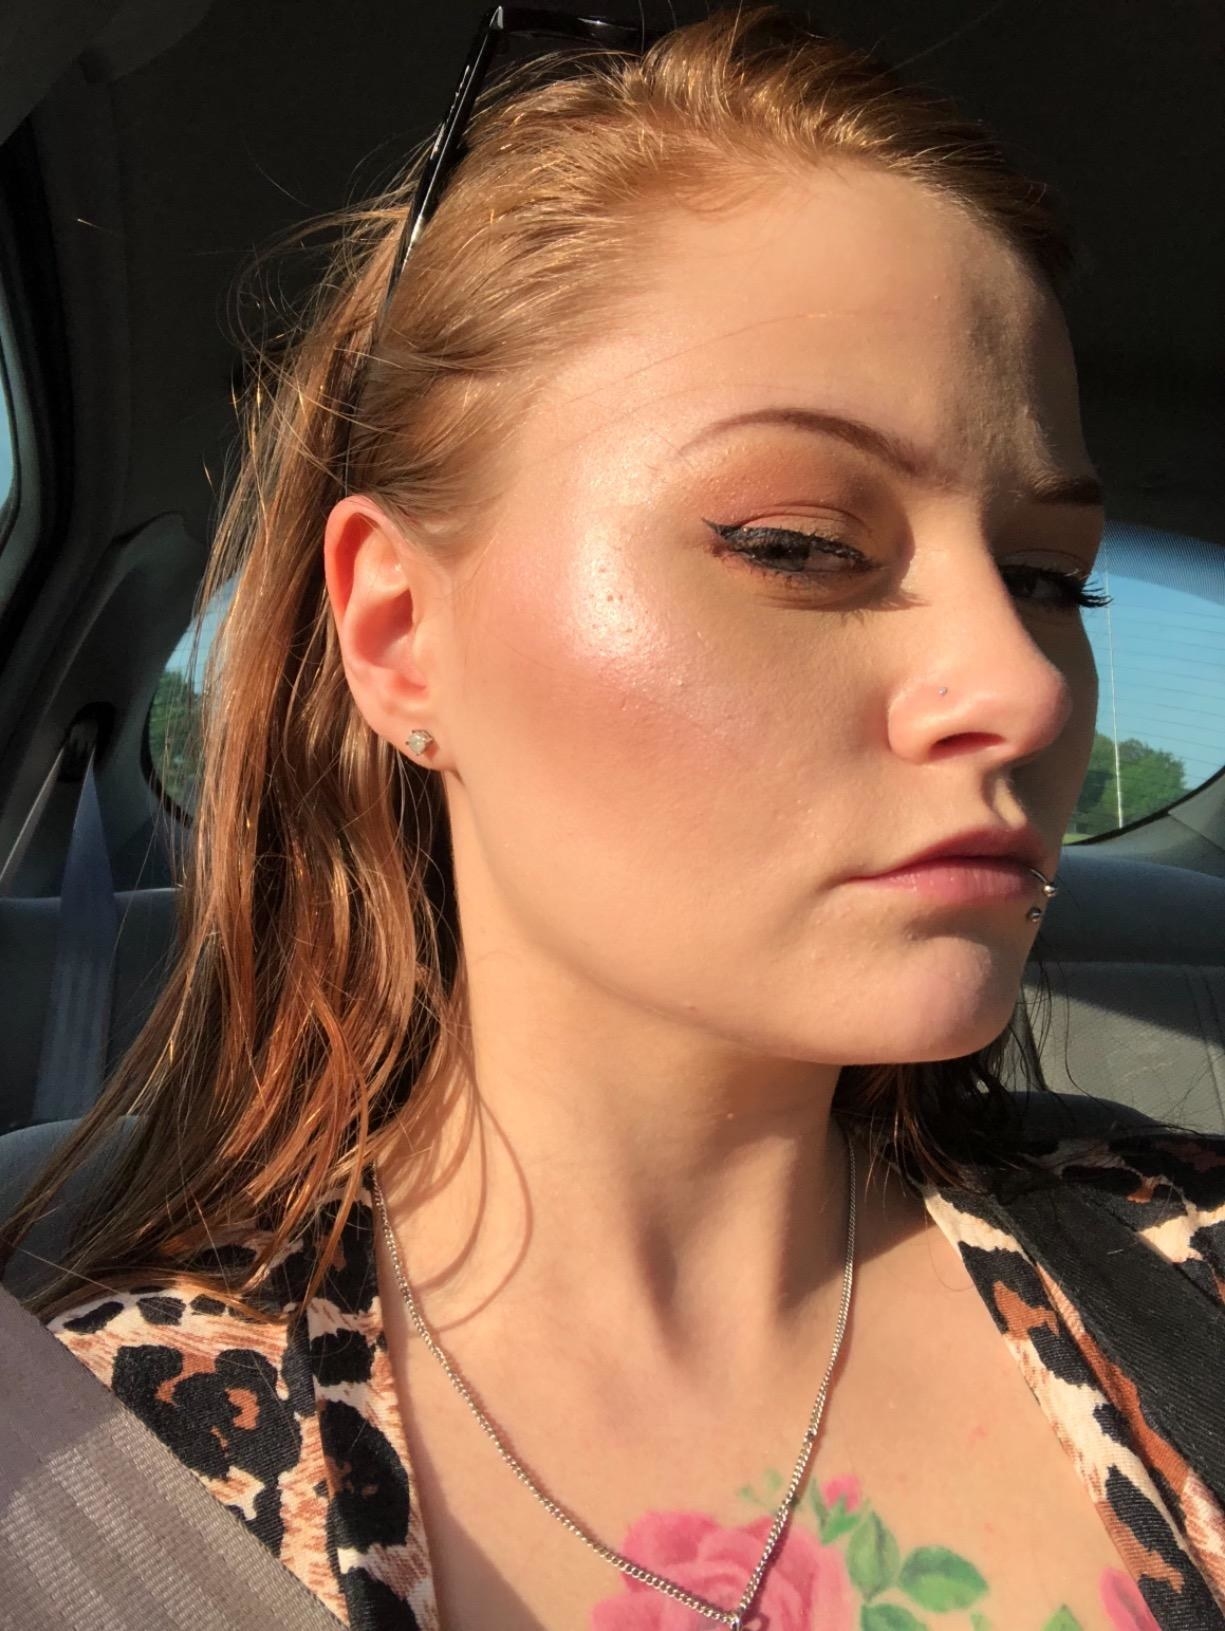 A reviewer showing the side of their face, which looks radiant and shimmery with the product on